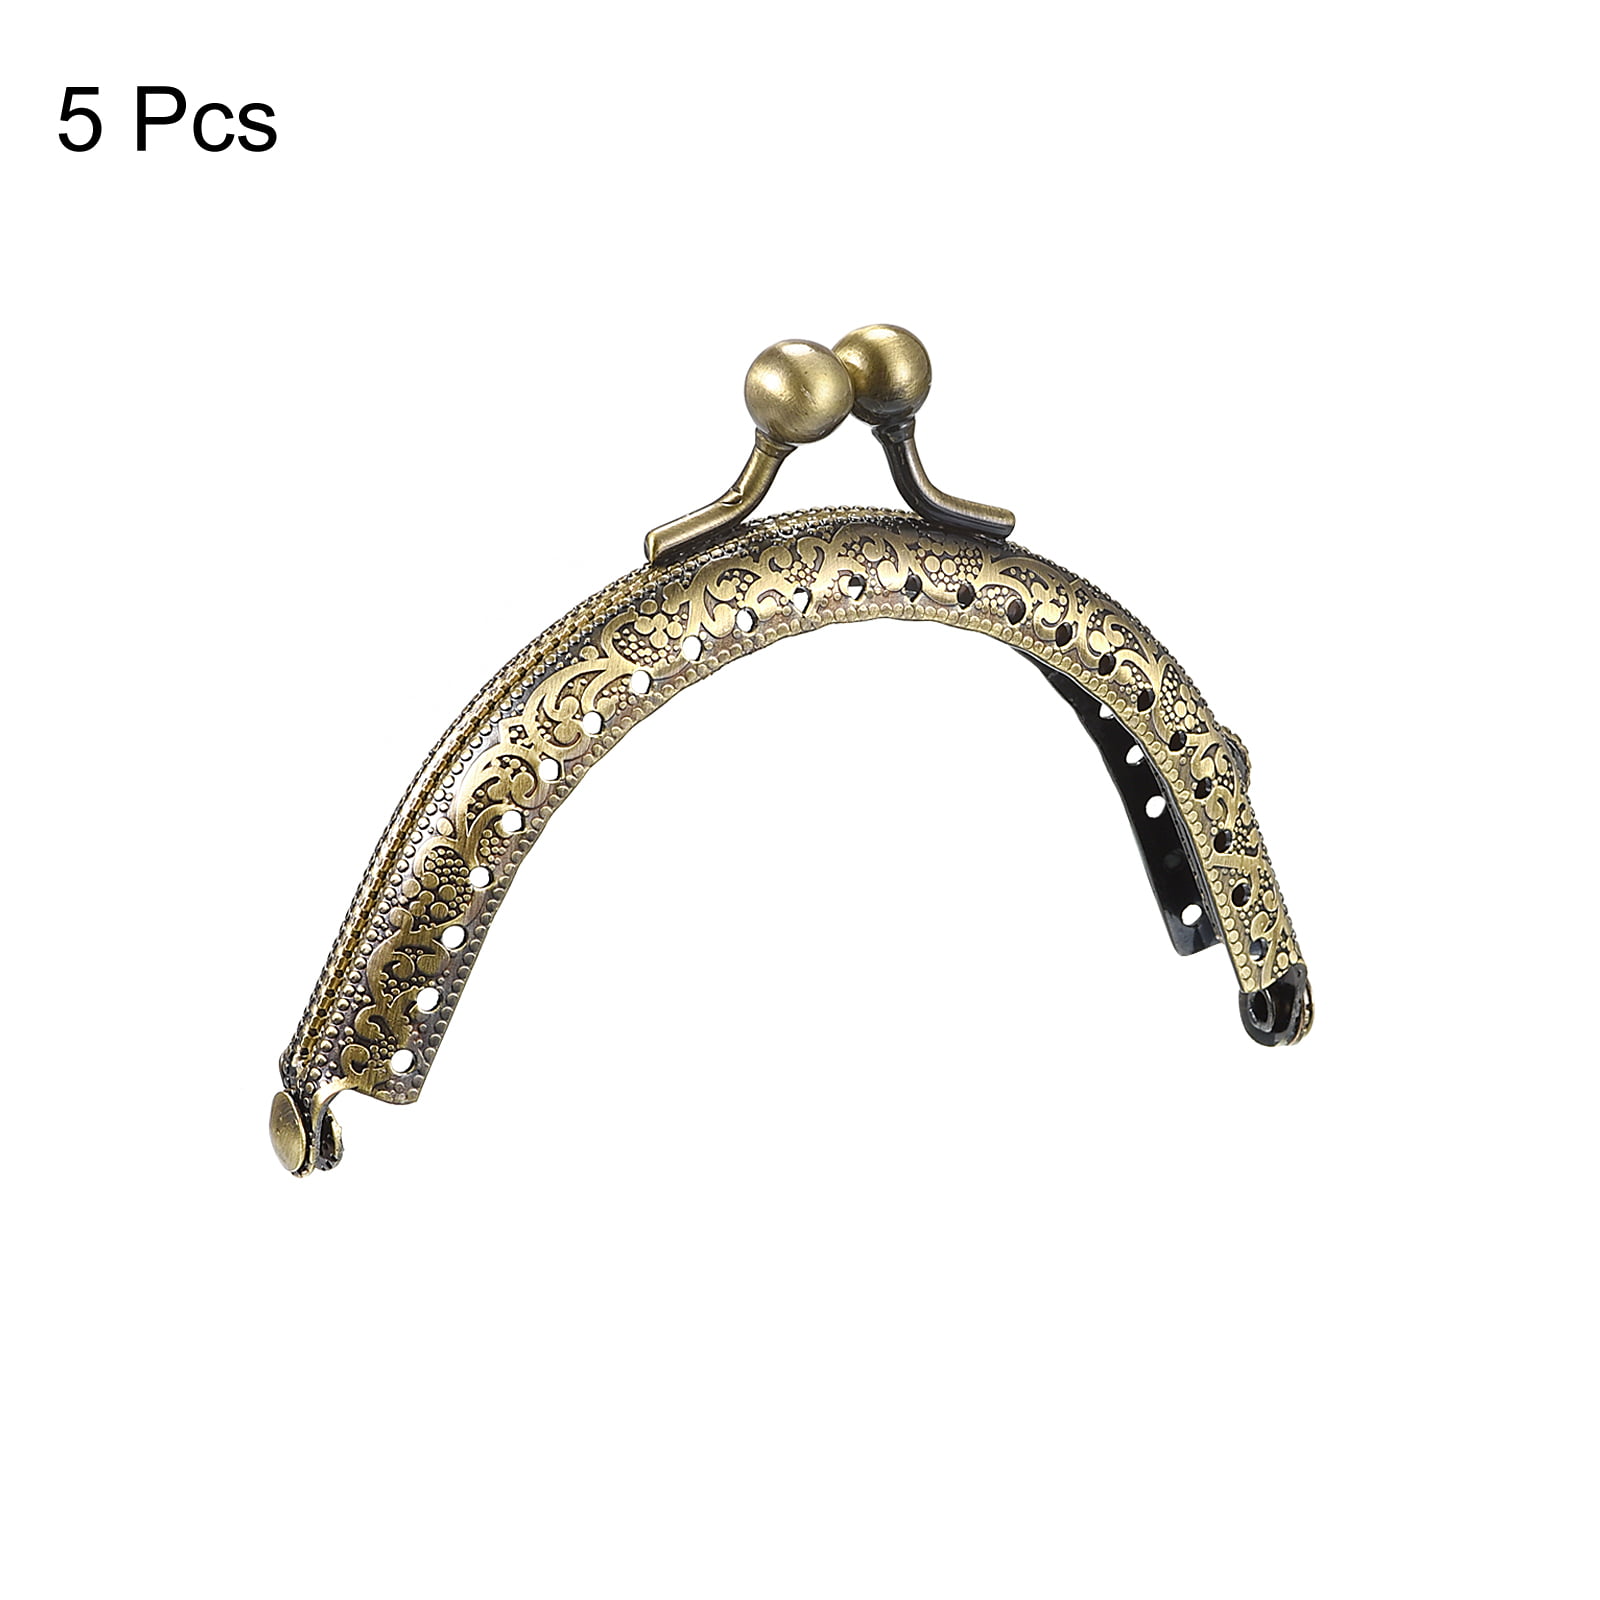 Metal Frame Handle Bead Purse Coin Bag Kiss Clasp Lock For DIY Craft  Accessories | eBay